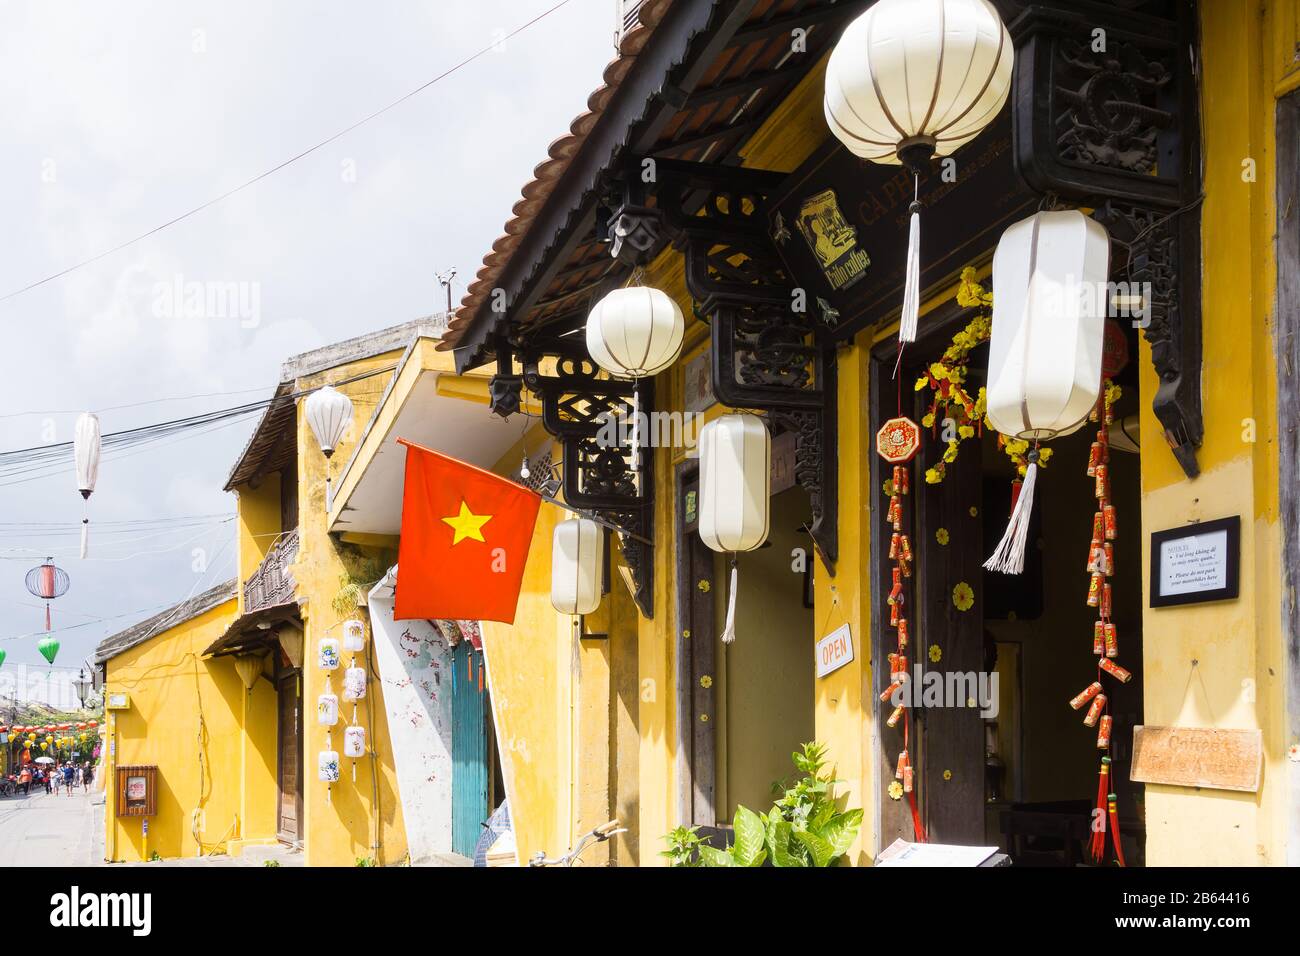 Vietnam Hoi An - House decorated with lanterns in Hoi An ancient town, Vietnam, Southeast Asia. Stock Photo